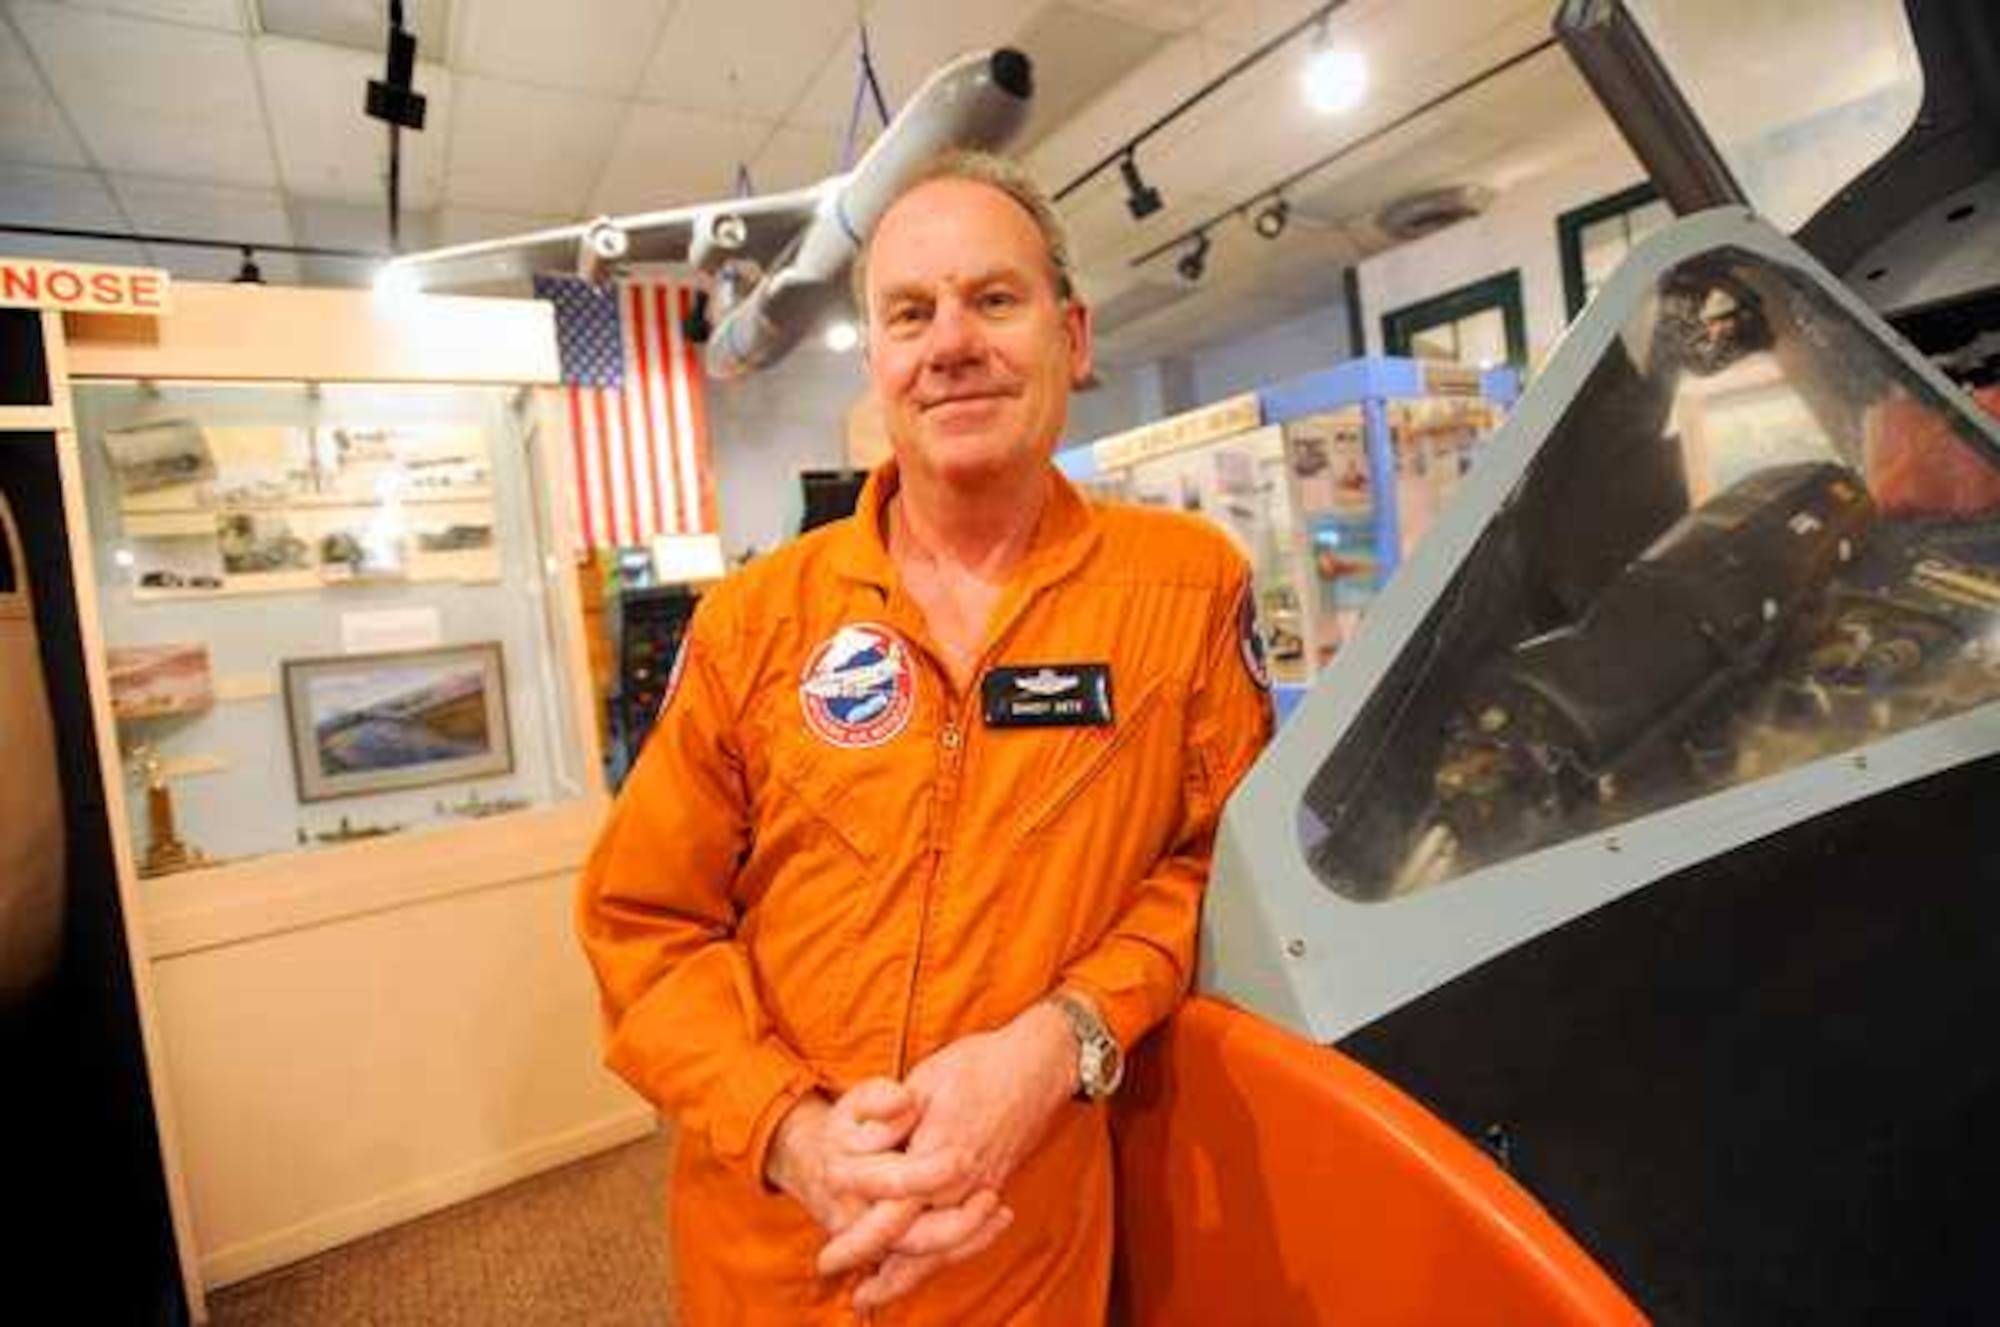 Volunteer Randy Getz stands next to the F-106 Delta Dart Simulator in the McChord Air Museum at Joint Base Lewis-McChord, Wash. (U.S. Air Force photo/Ingrid Barrentine)